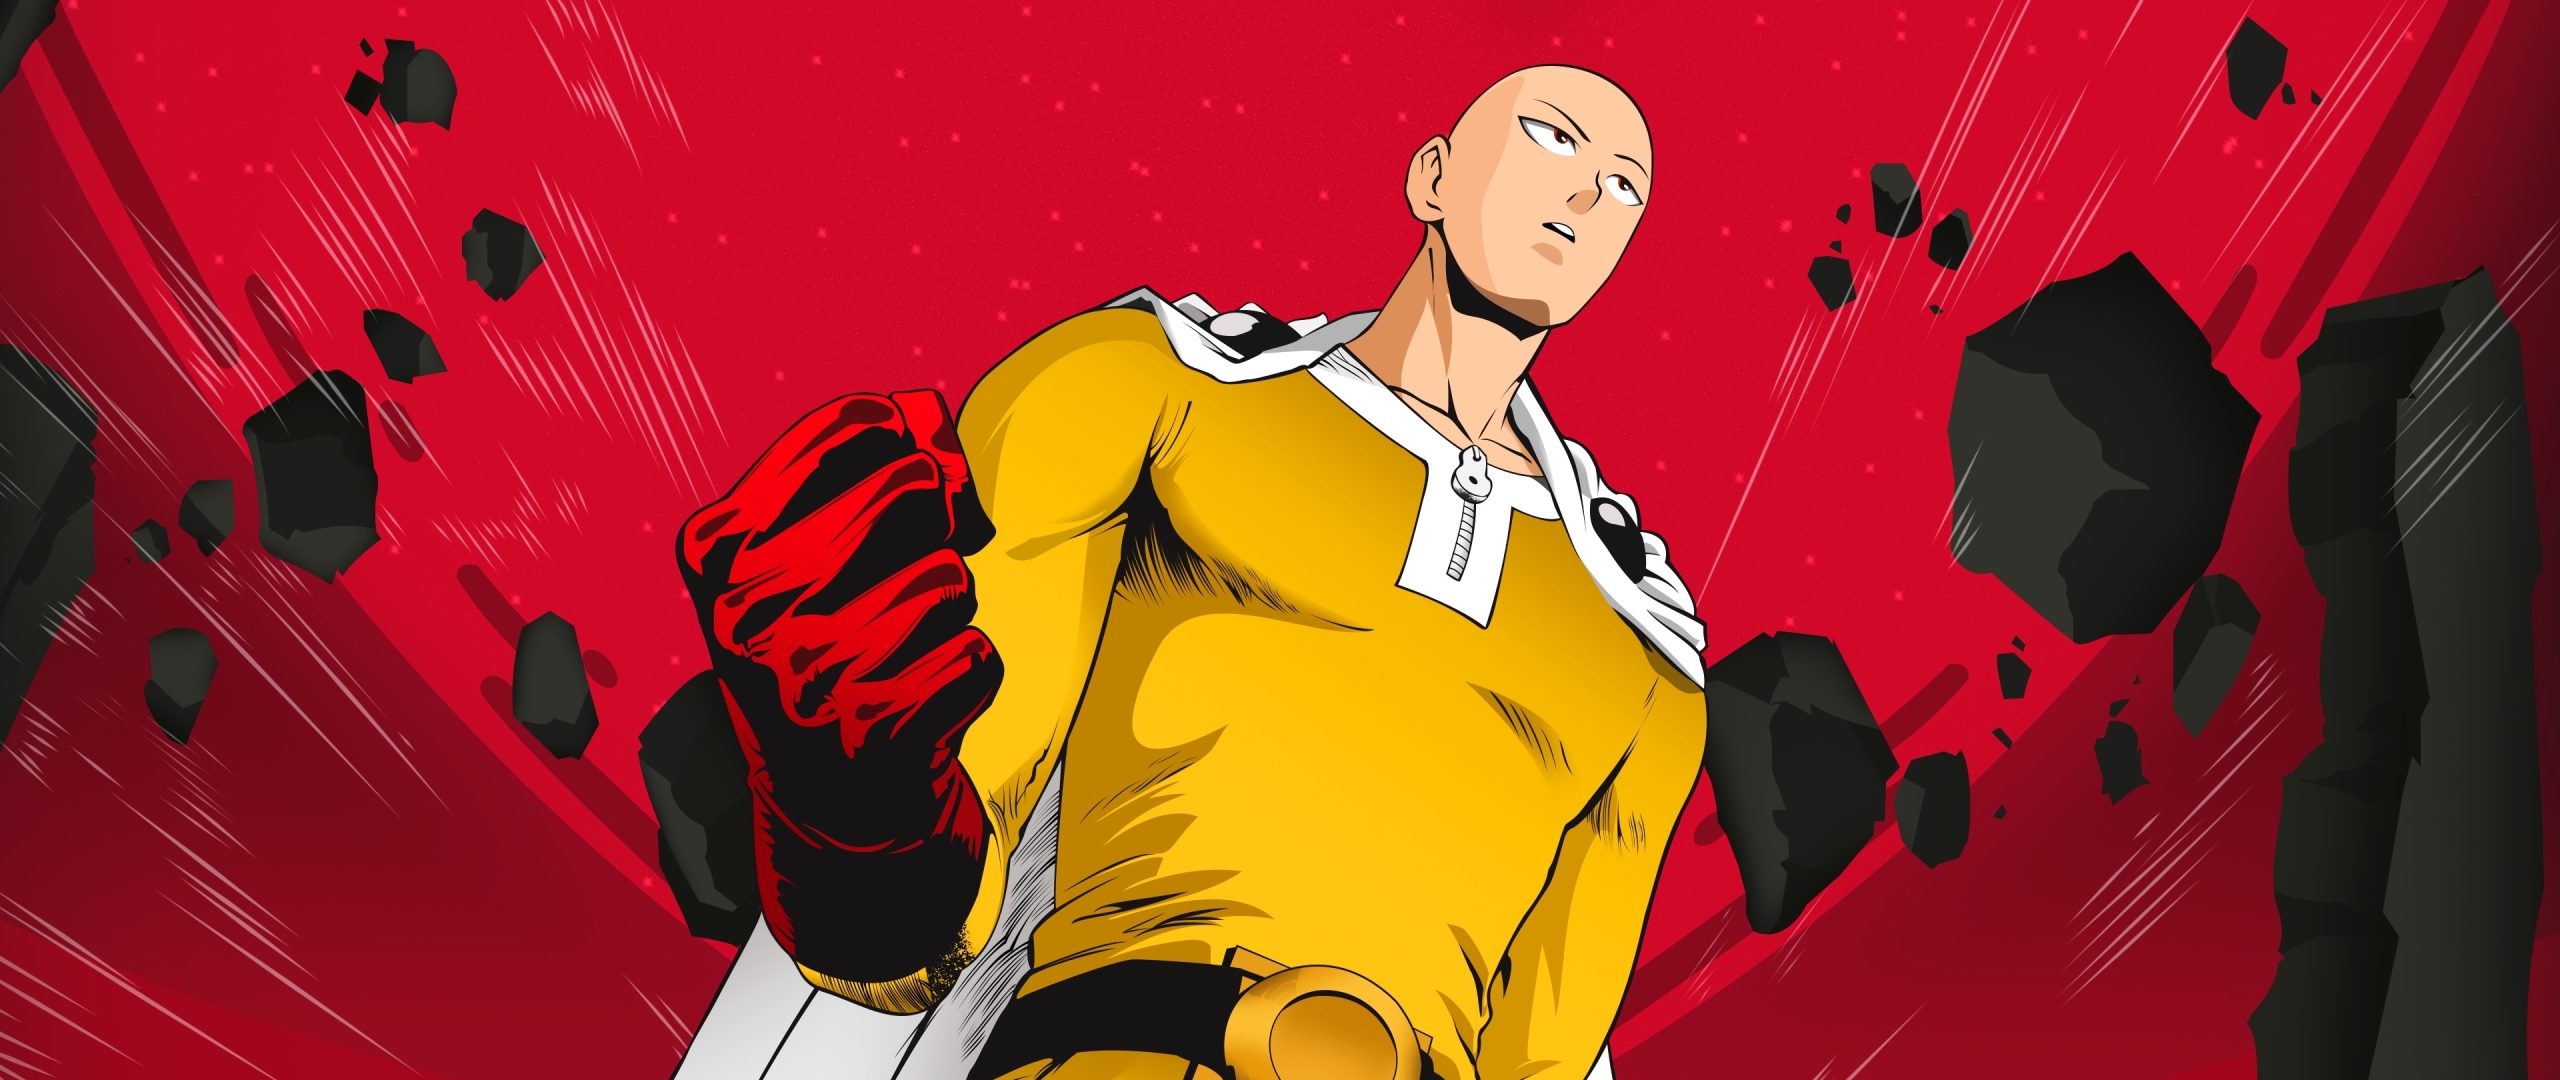 One Punch Man Wallpaper For Pc - Wallpaperforu